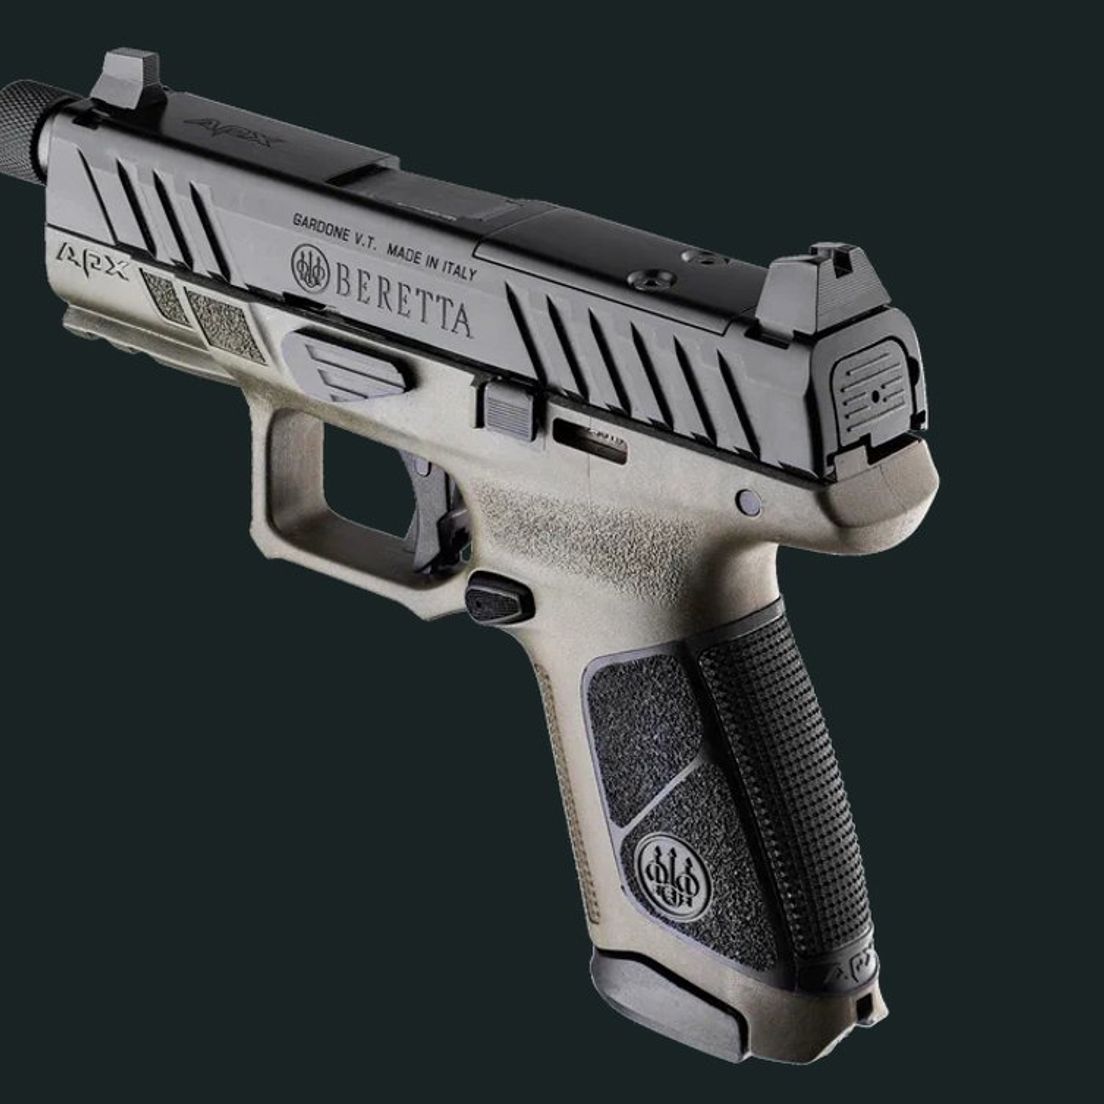 Beretta APX A1 Compact Tactical: A precision weapon for tactical excellence